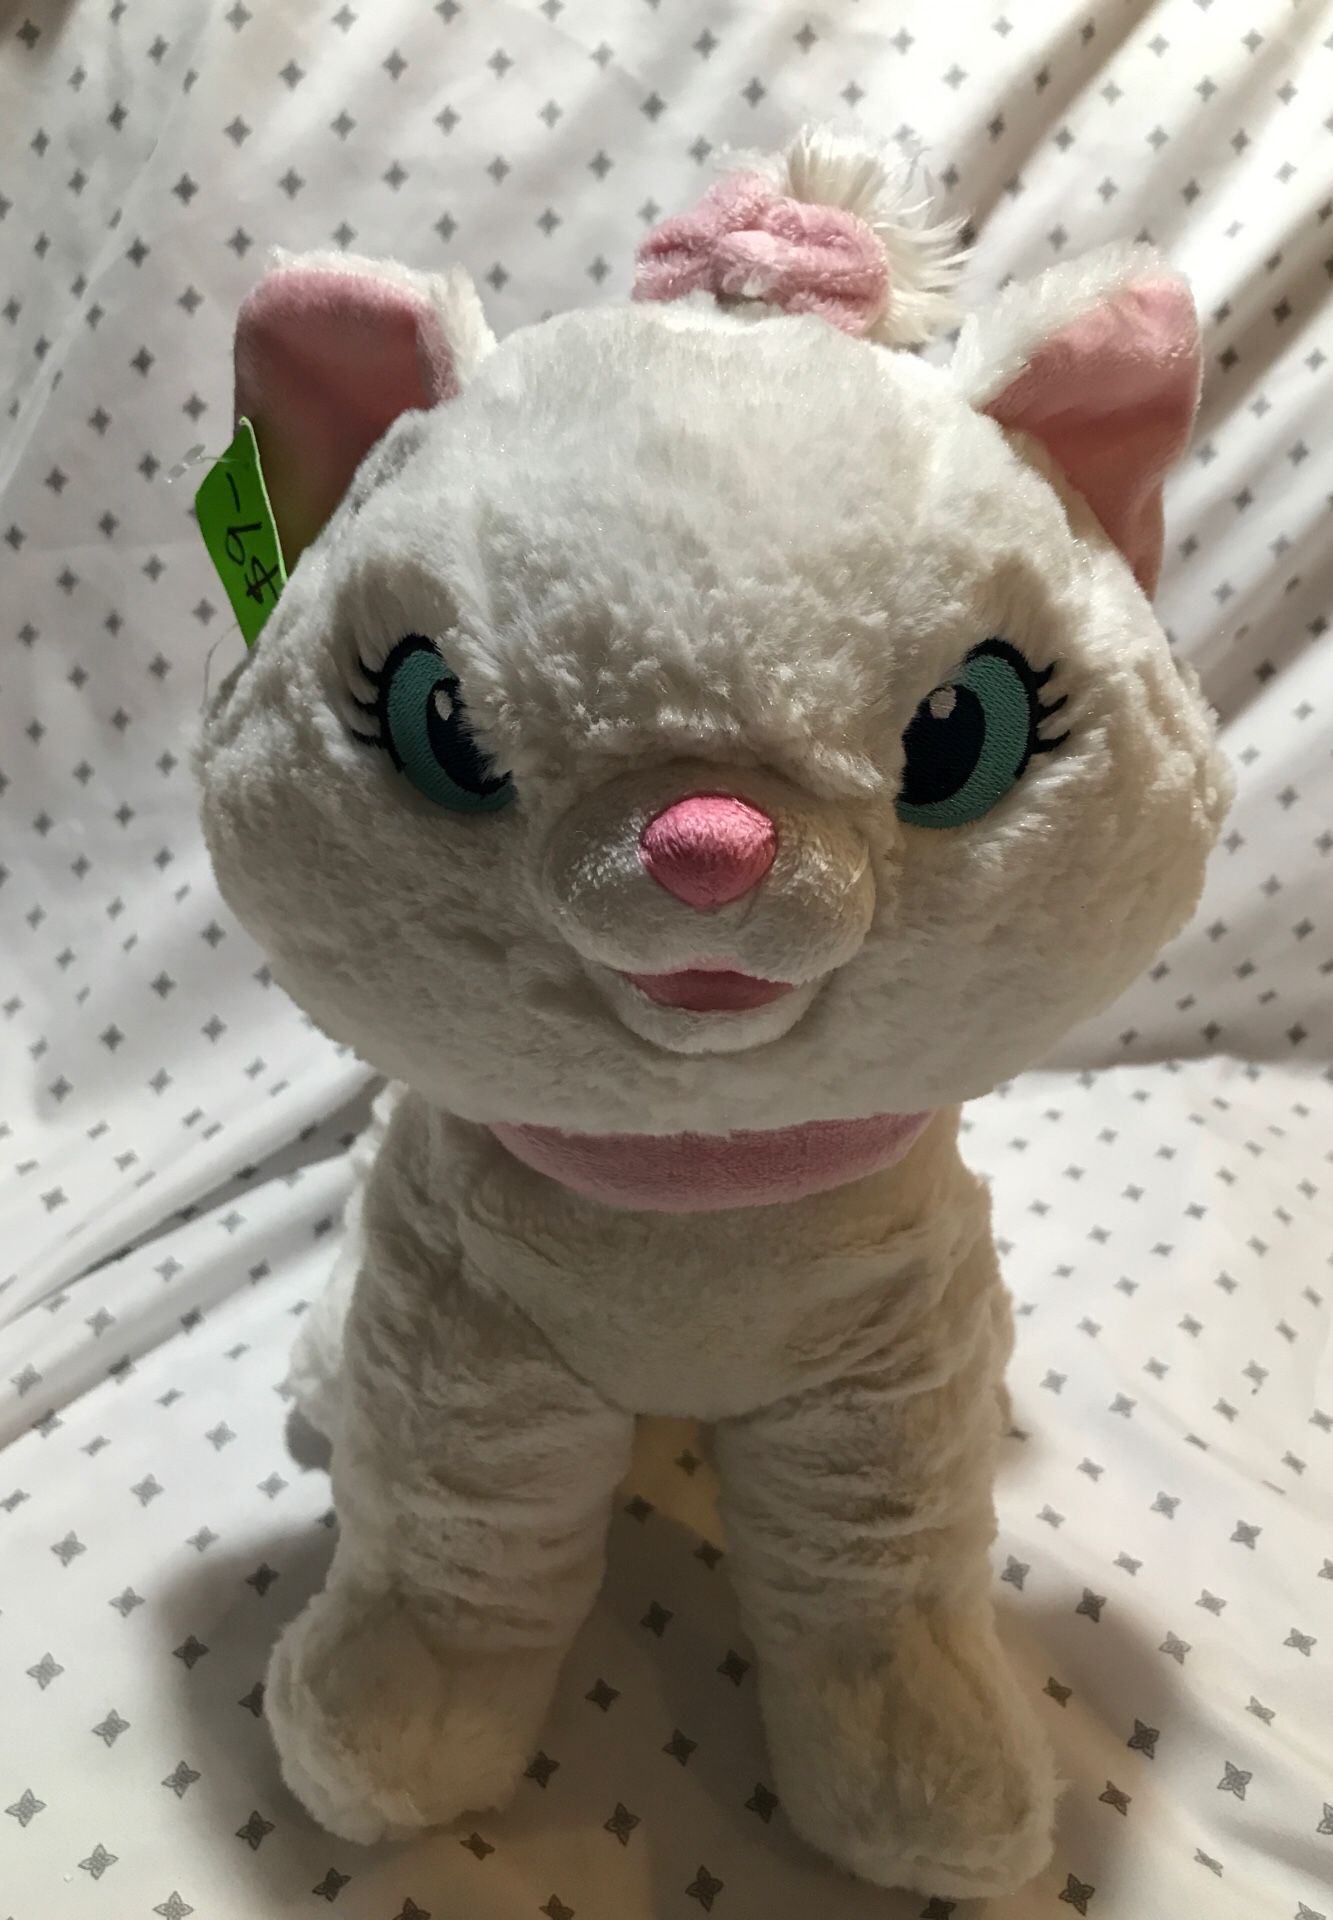 13 “ Aristcats beanbag stuffed animal $9-Open page to see the rest